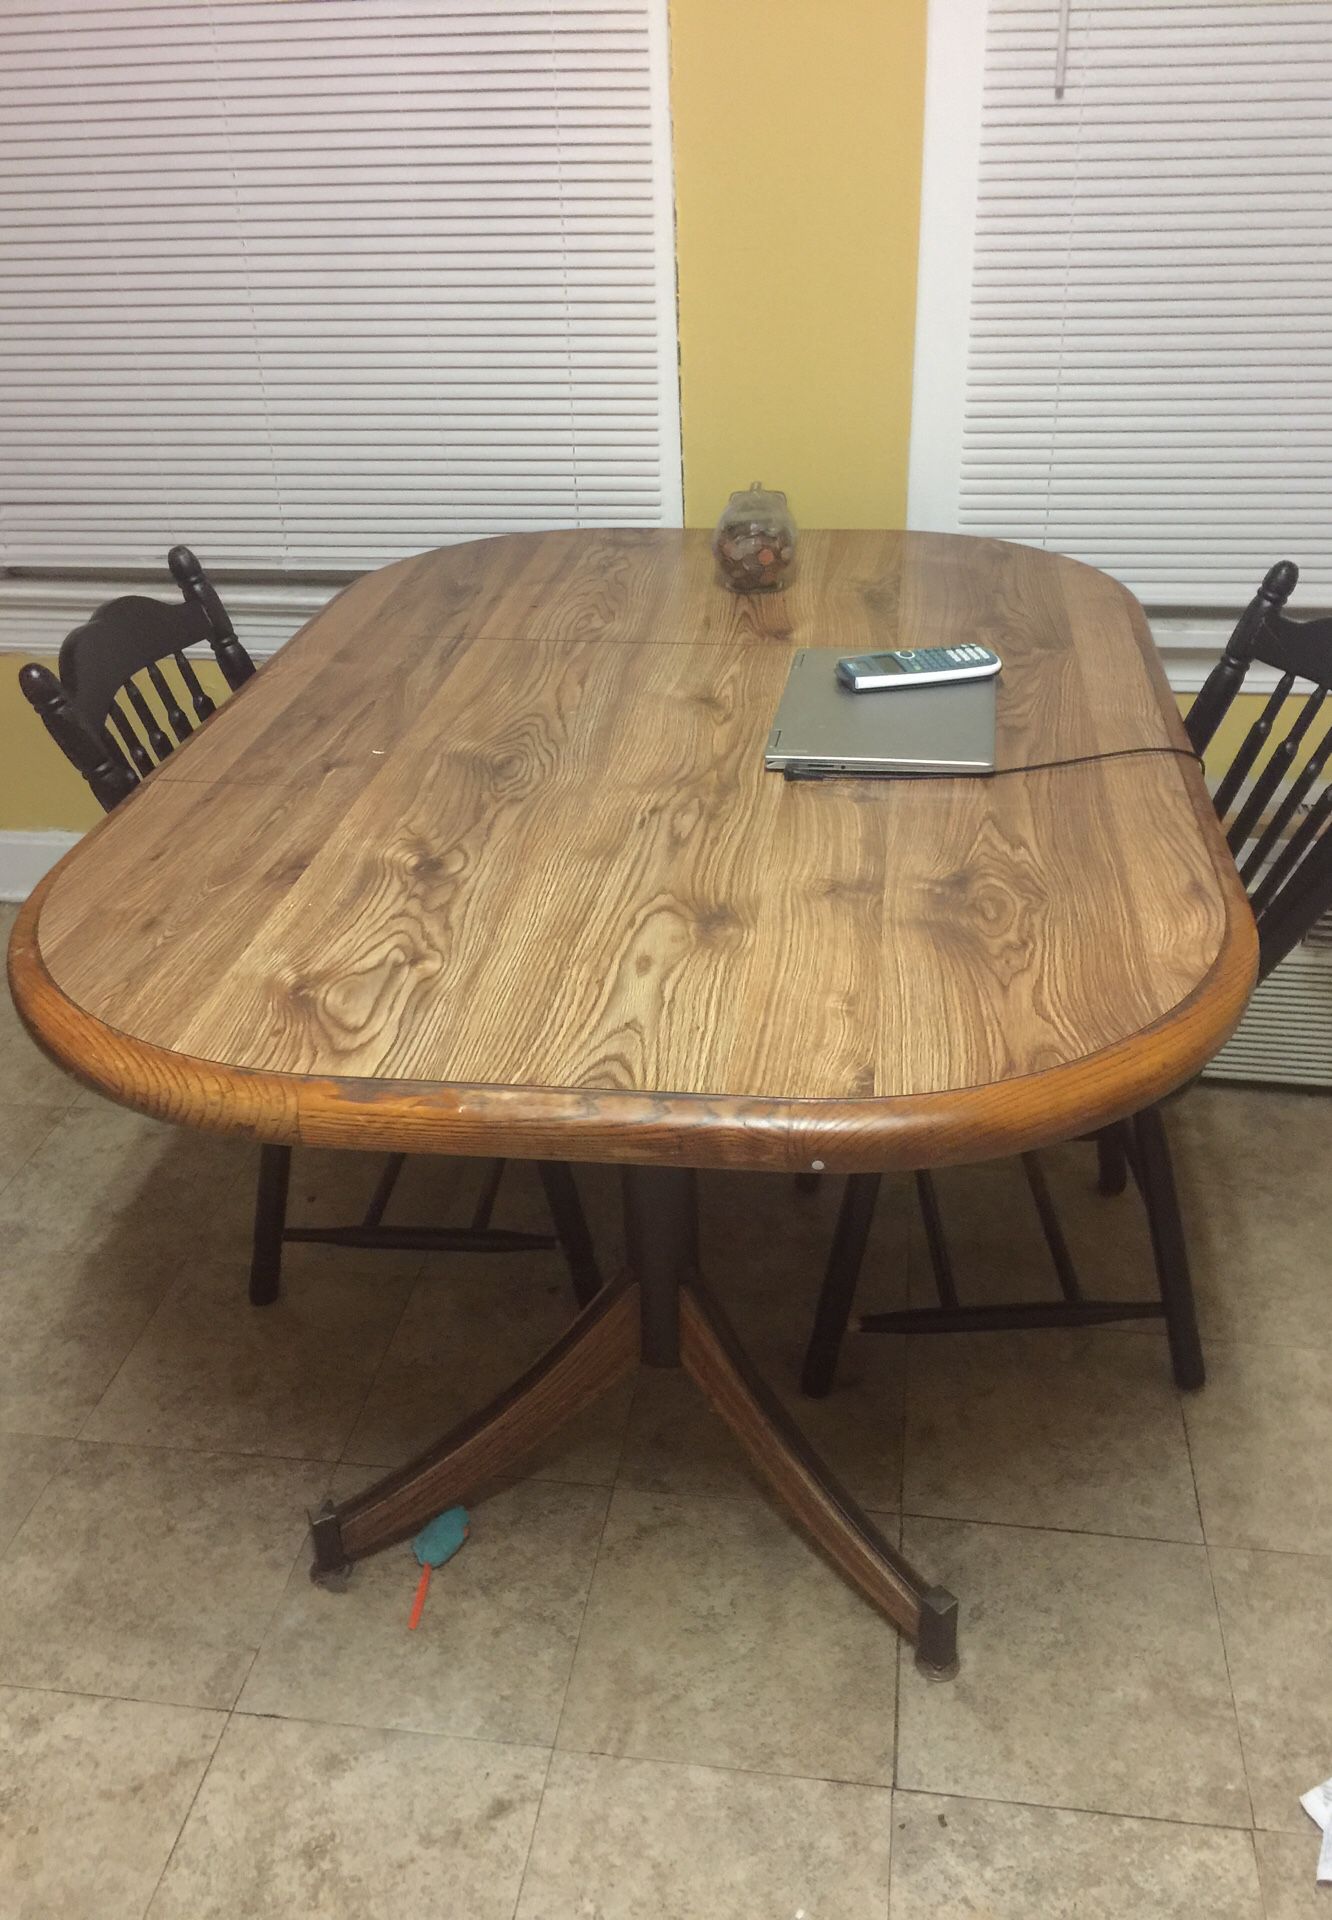 Kitchen Table and two chairs for immediate sale